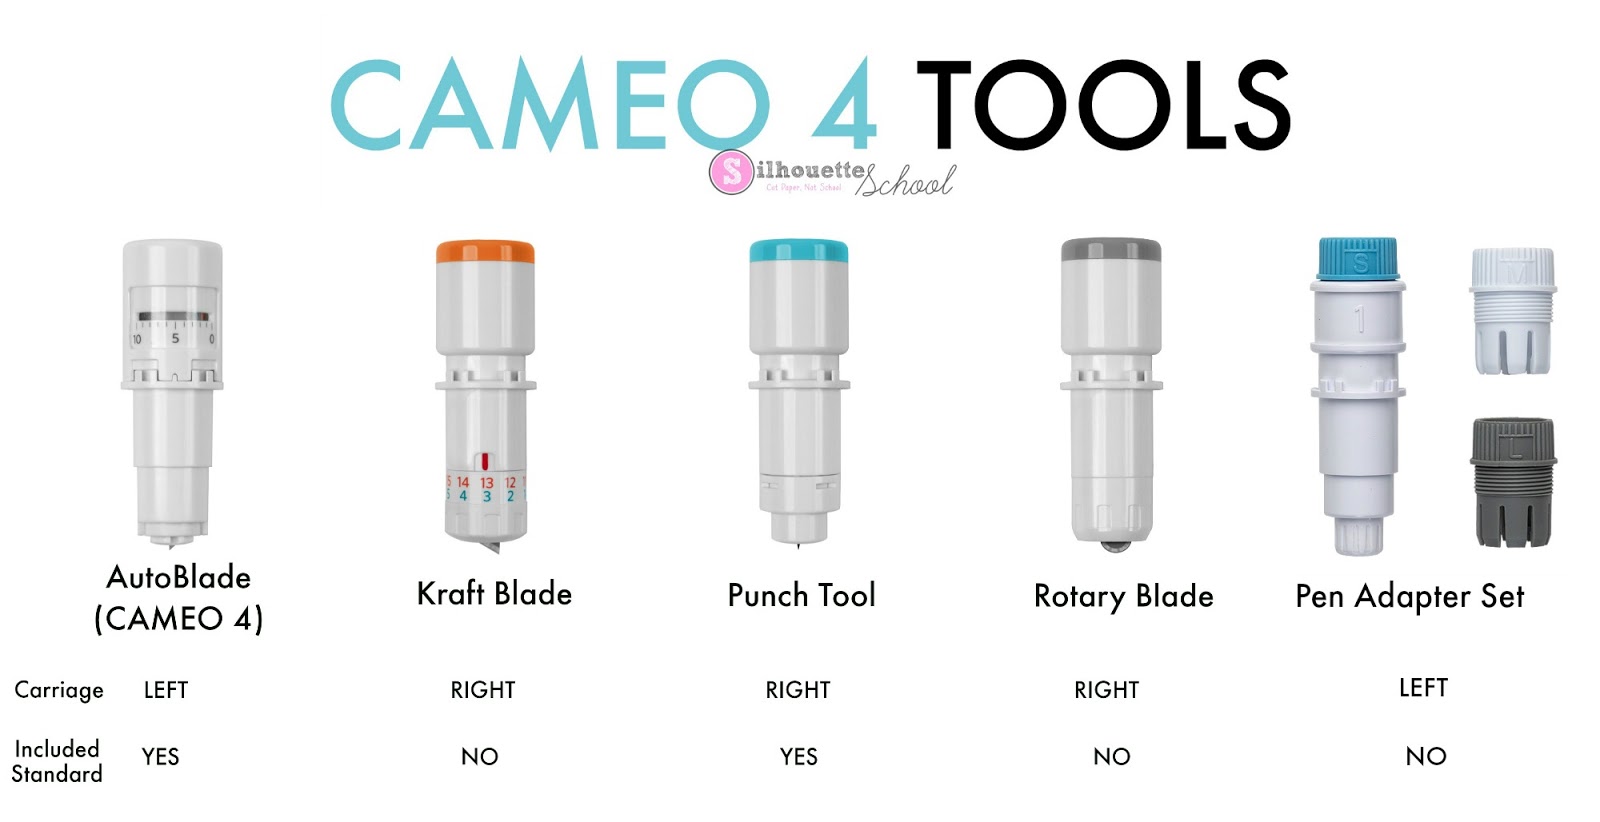 Silhouette CAMEO 4 Tools: What Blades are Included? - Silhouette School